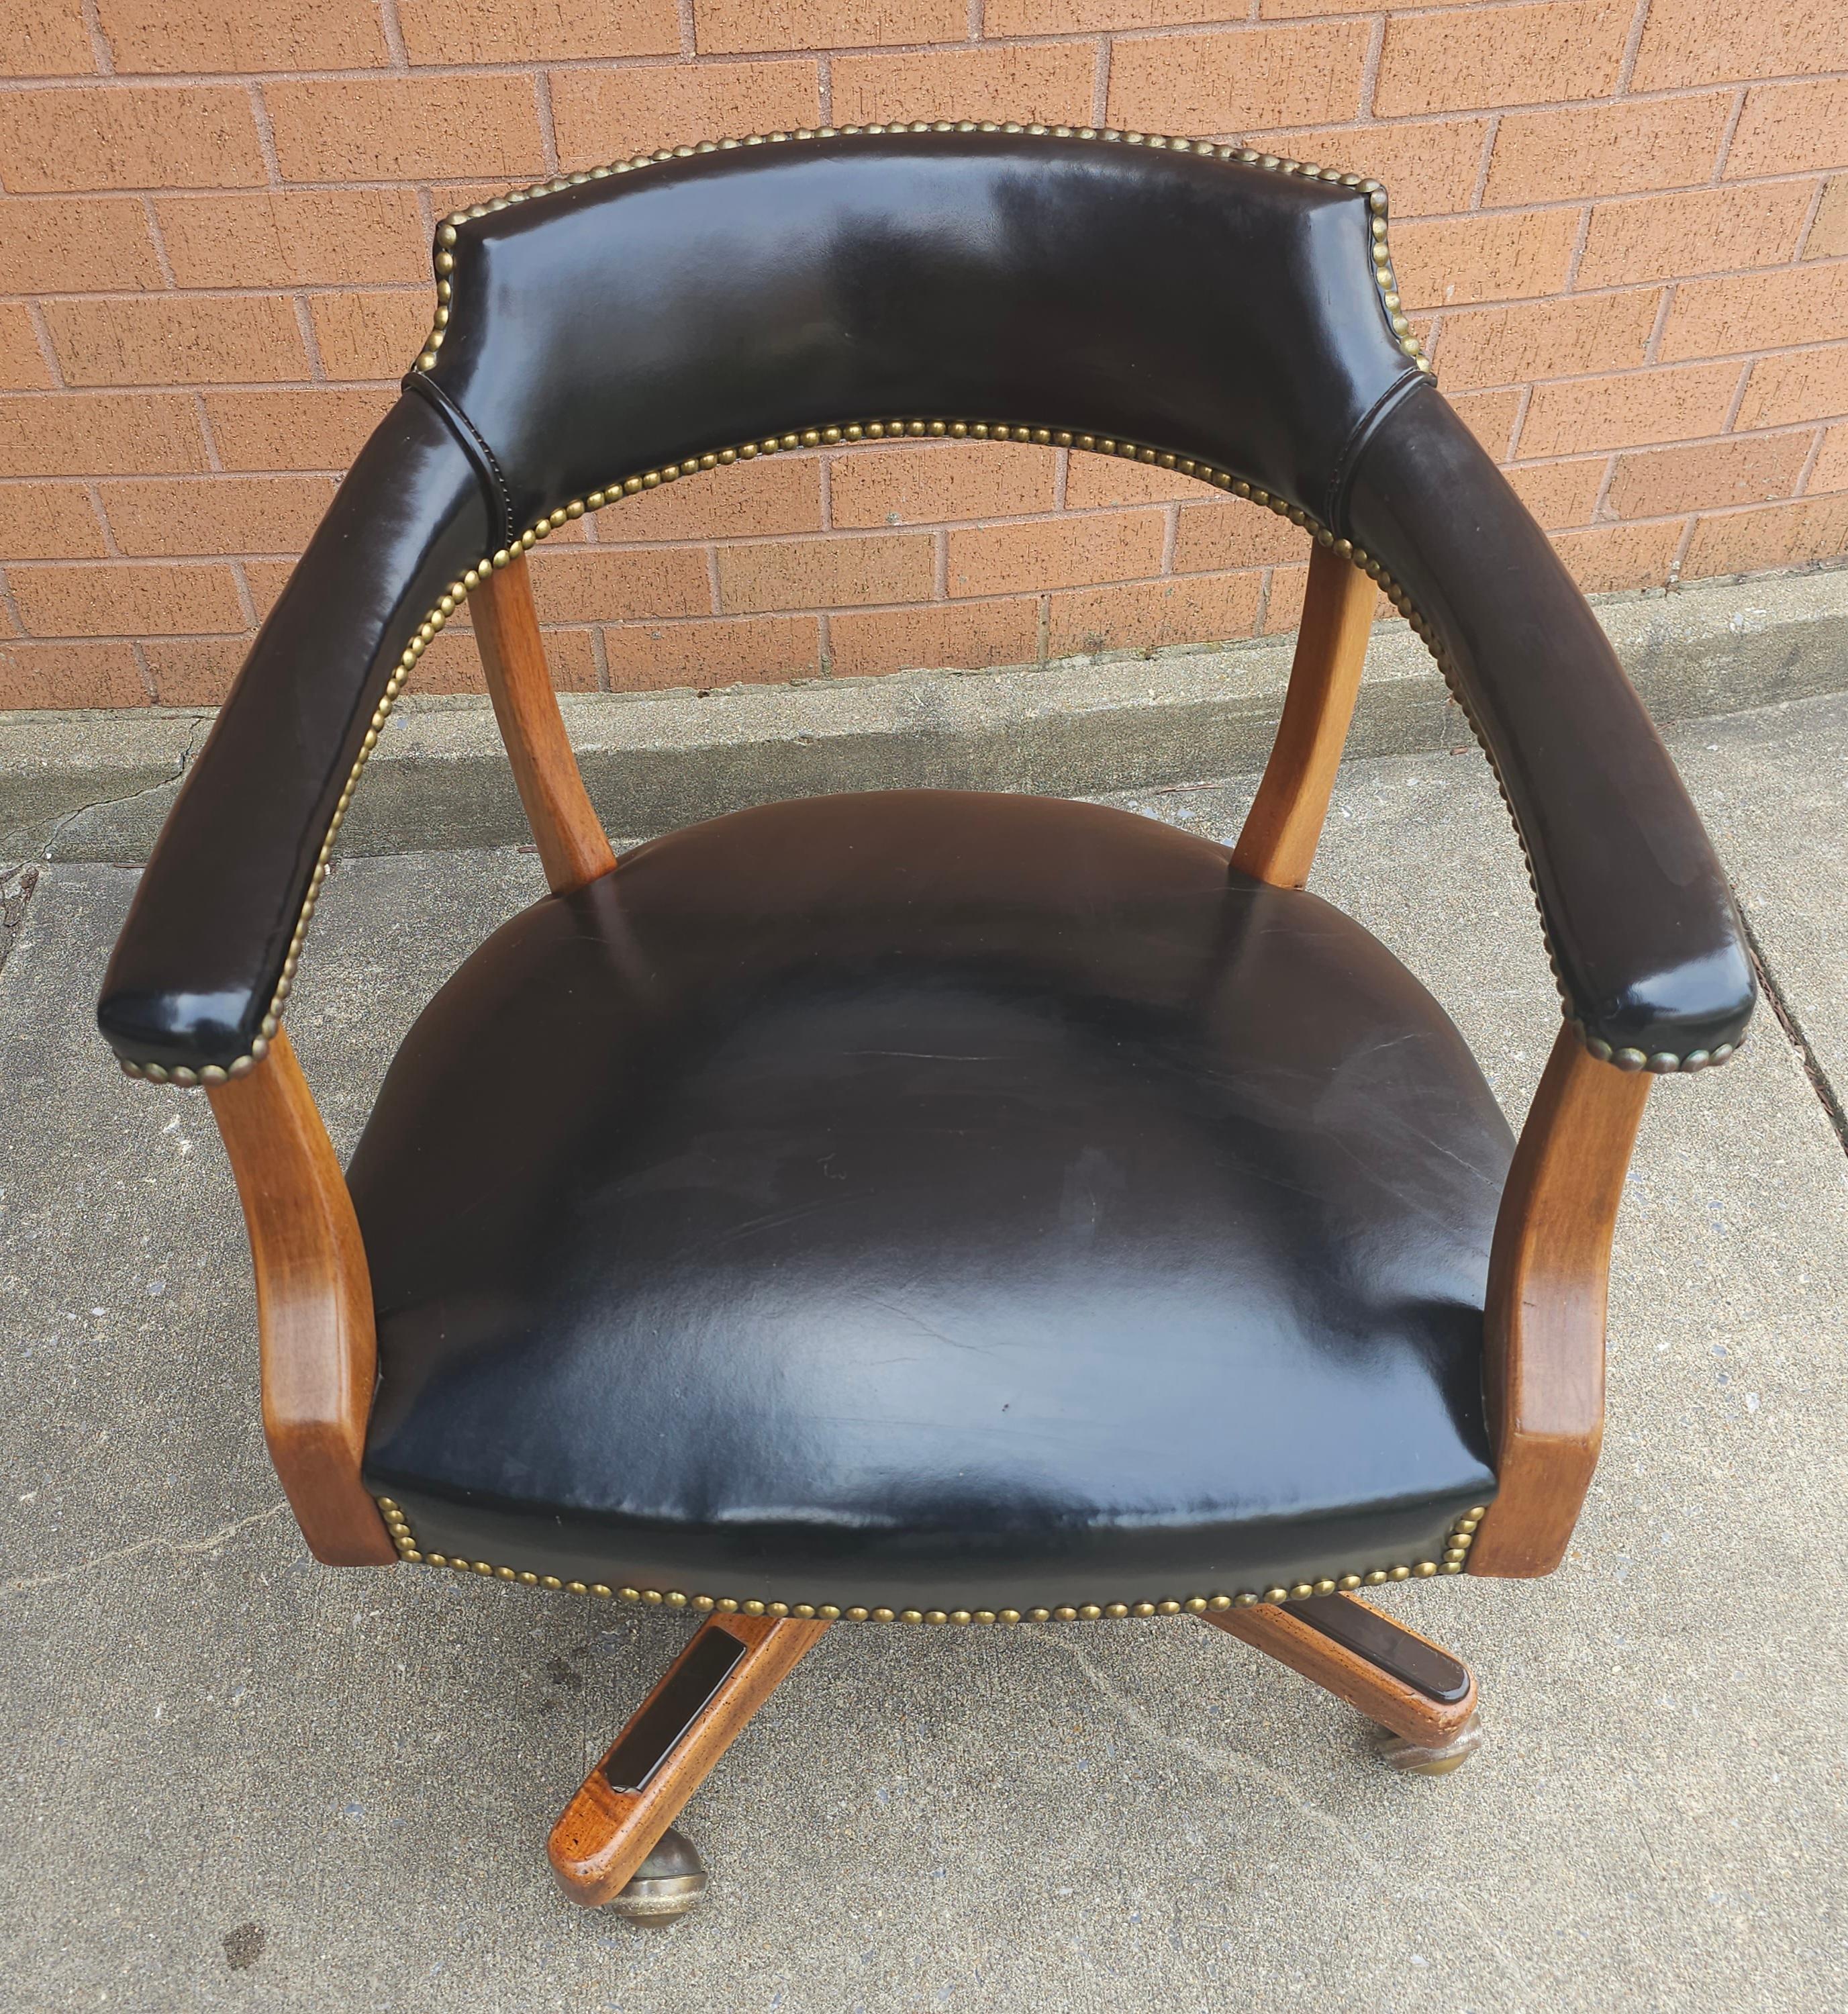 A Victorian Style Maple , Black Leather and Brass Nail Studded Rolling,  360 degree revolving and tilting Office Chair. Adjustable  seat height. Measures 24.5